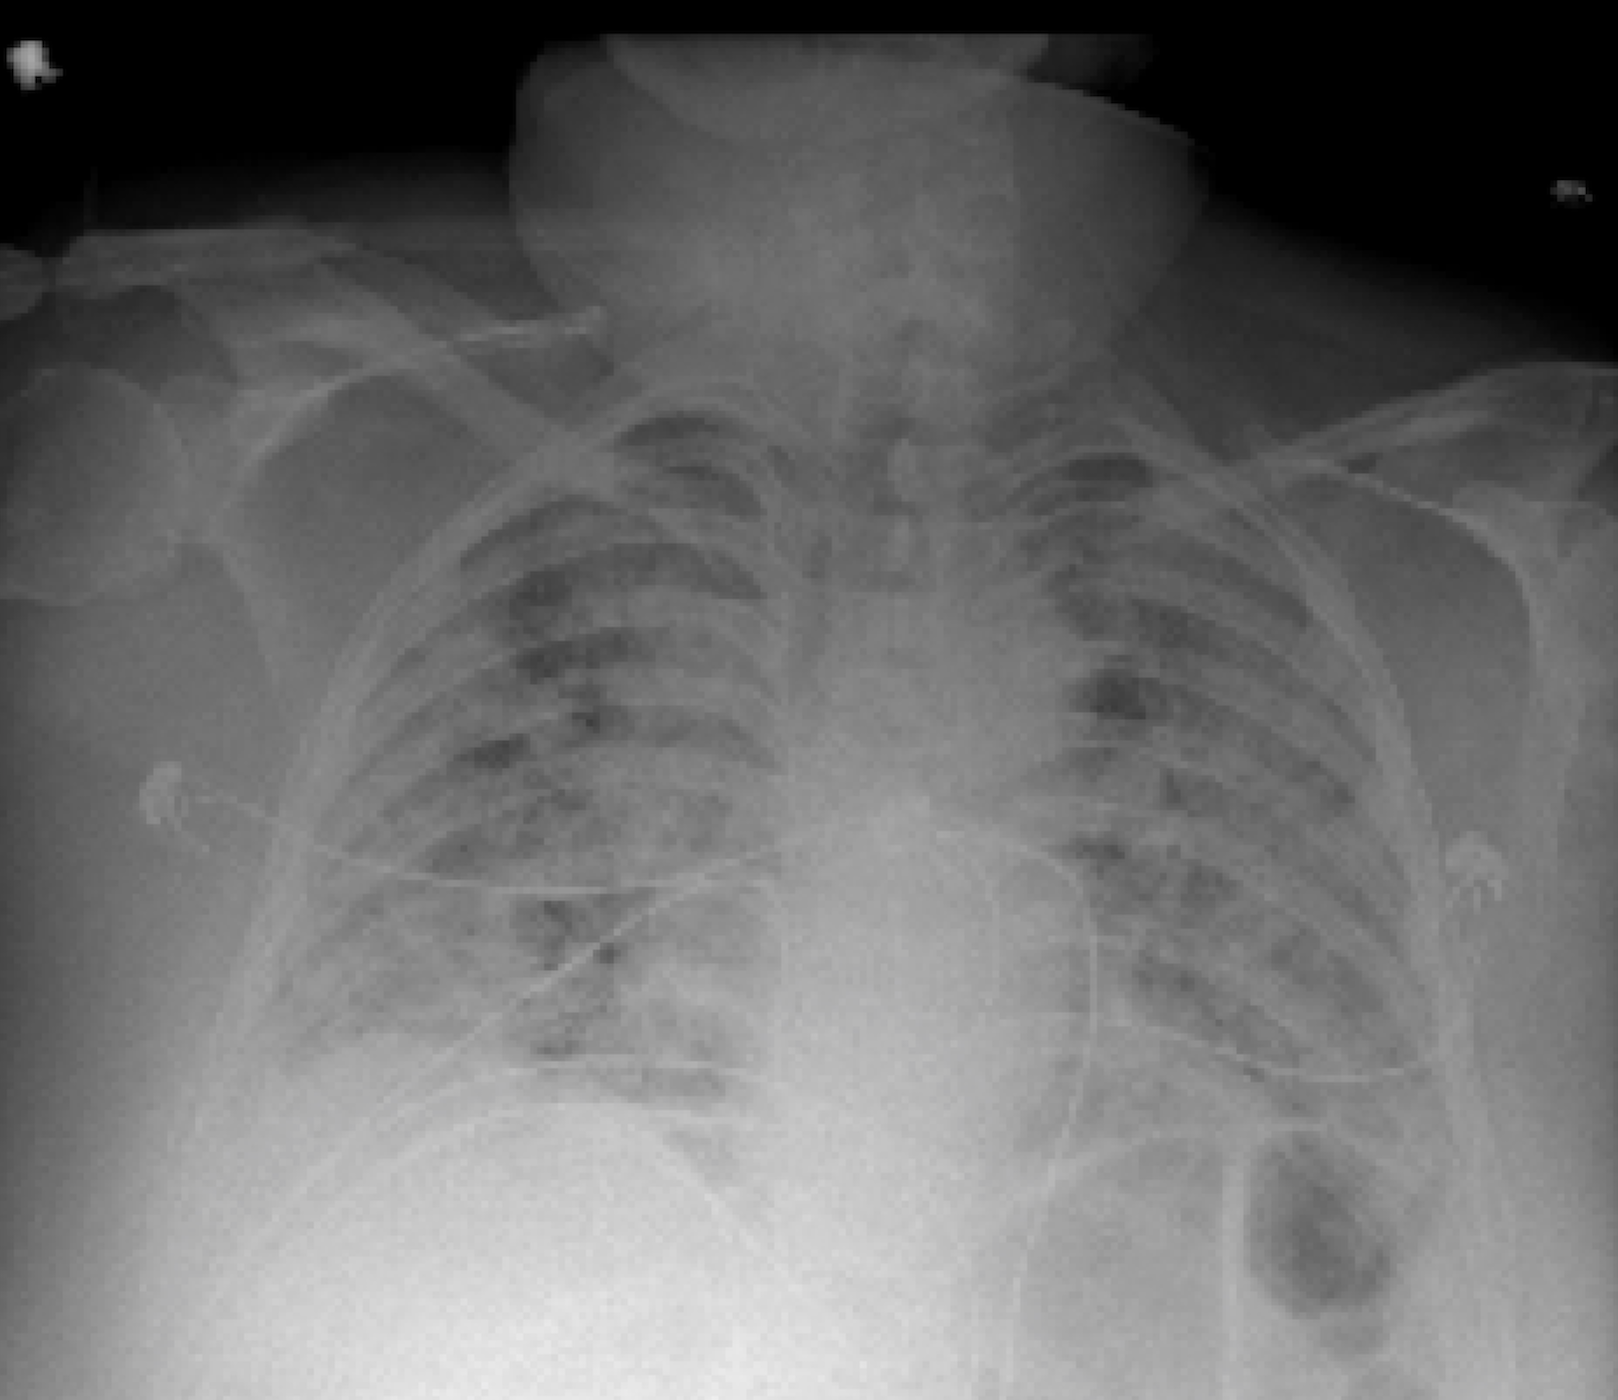 Chest X-ray from patient severely ill from COVID-19, showing (in white patches) infected tissue spread across the lungs

CREDIT Courtesy of Nature Publishing or npj Digital Medicine